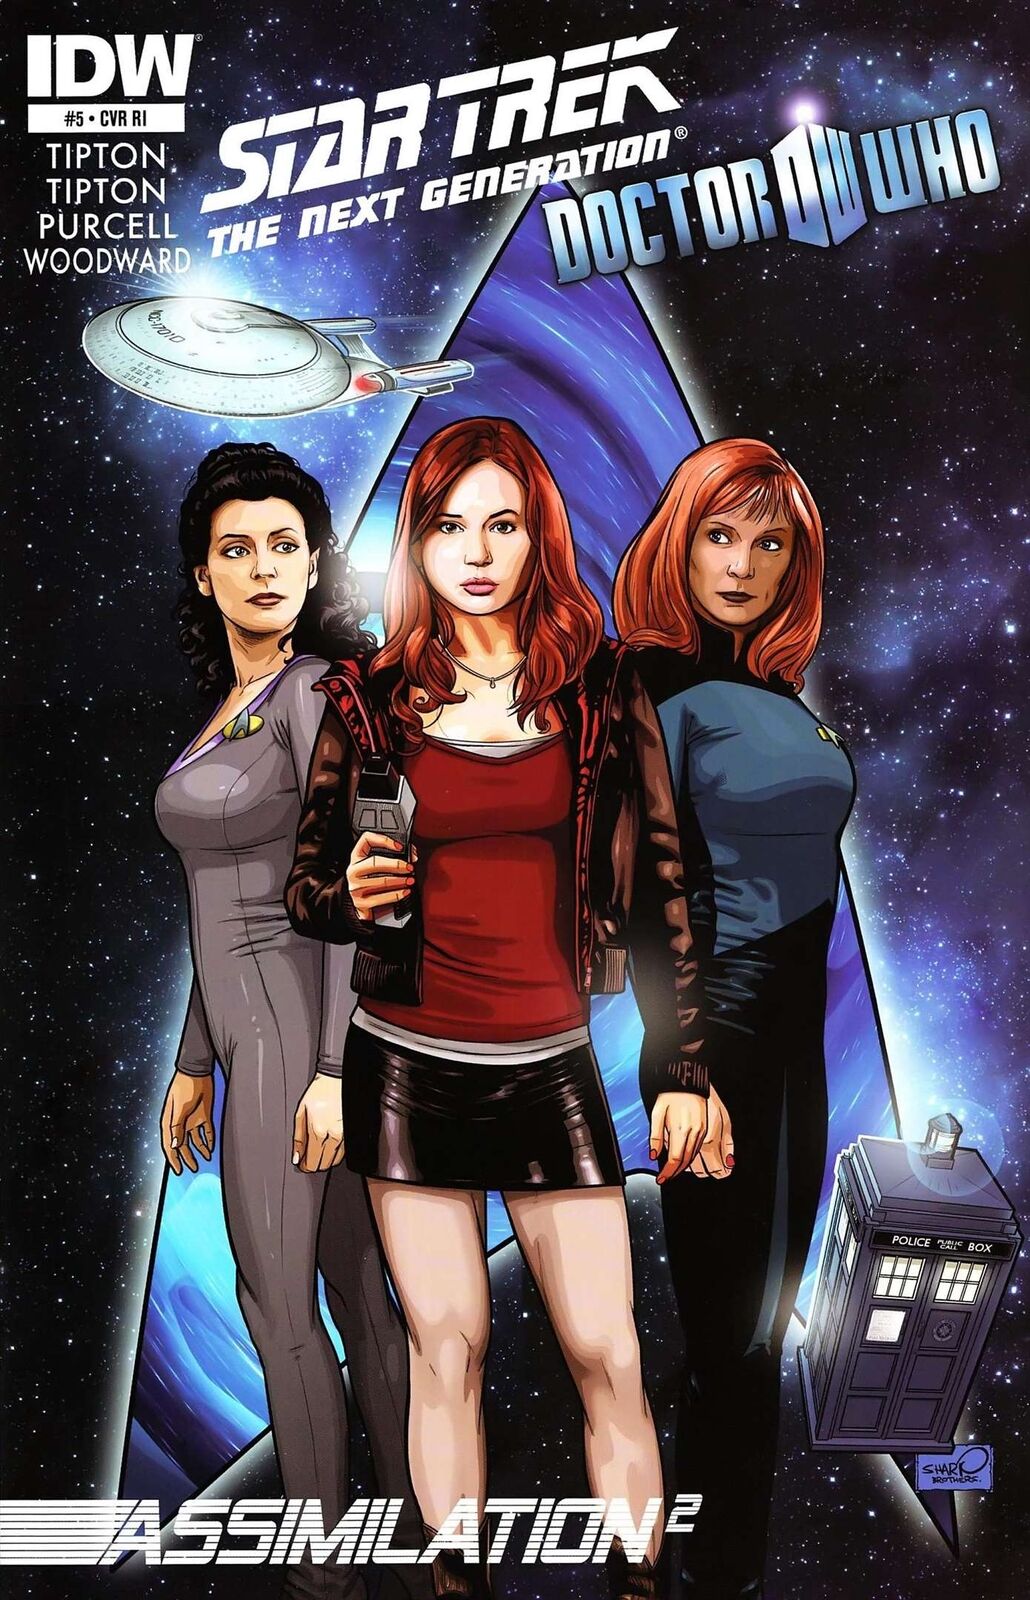 Star Trek: The Next Generation/Doctor Who: Assimilation #5A VF; IDW | RI - we co